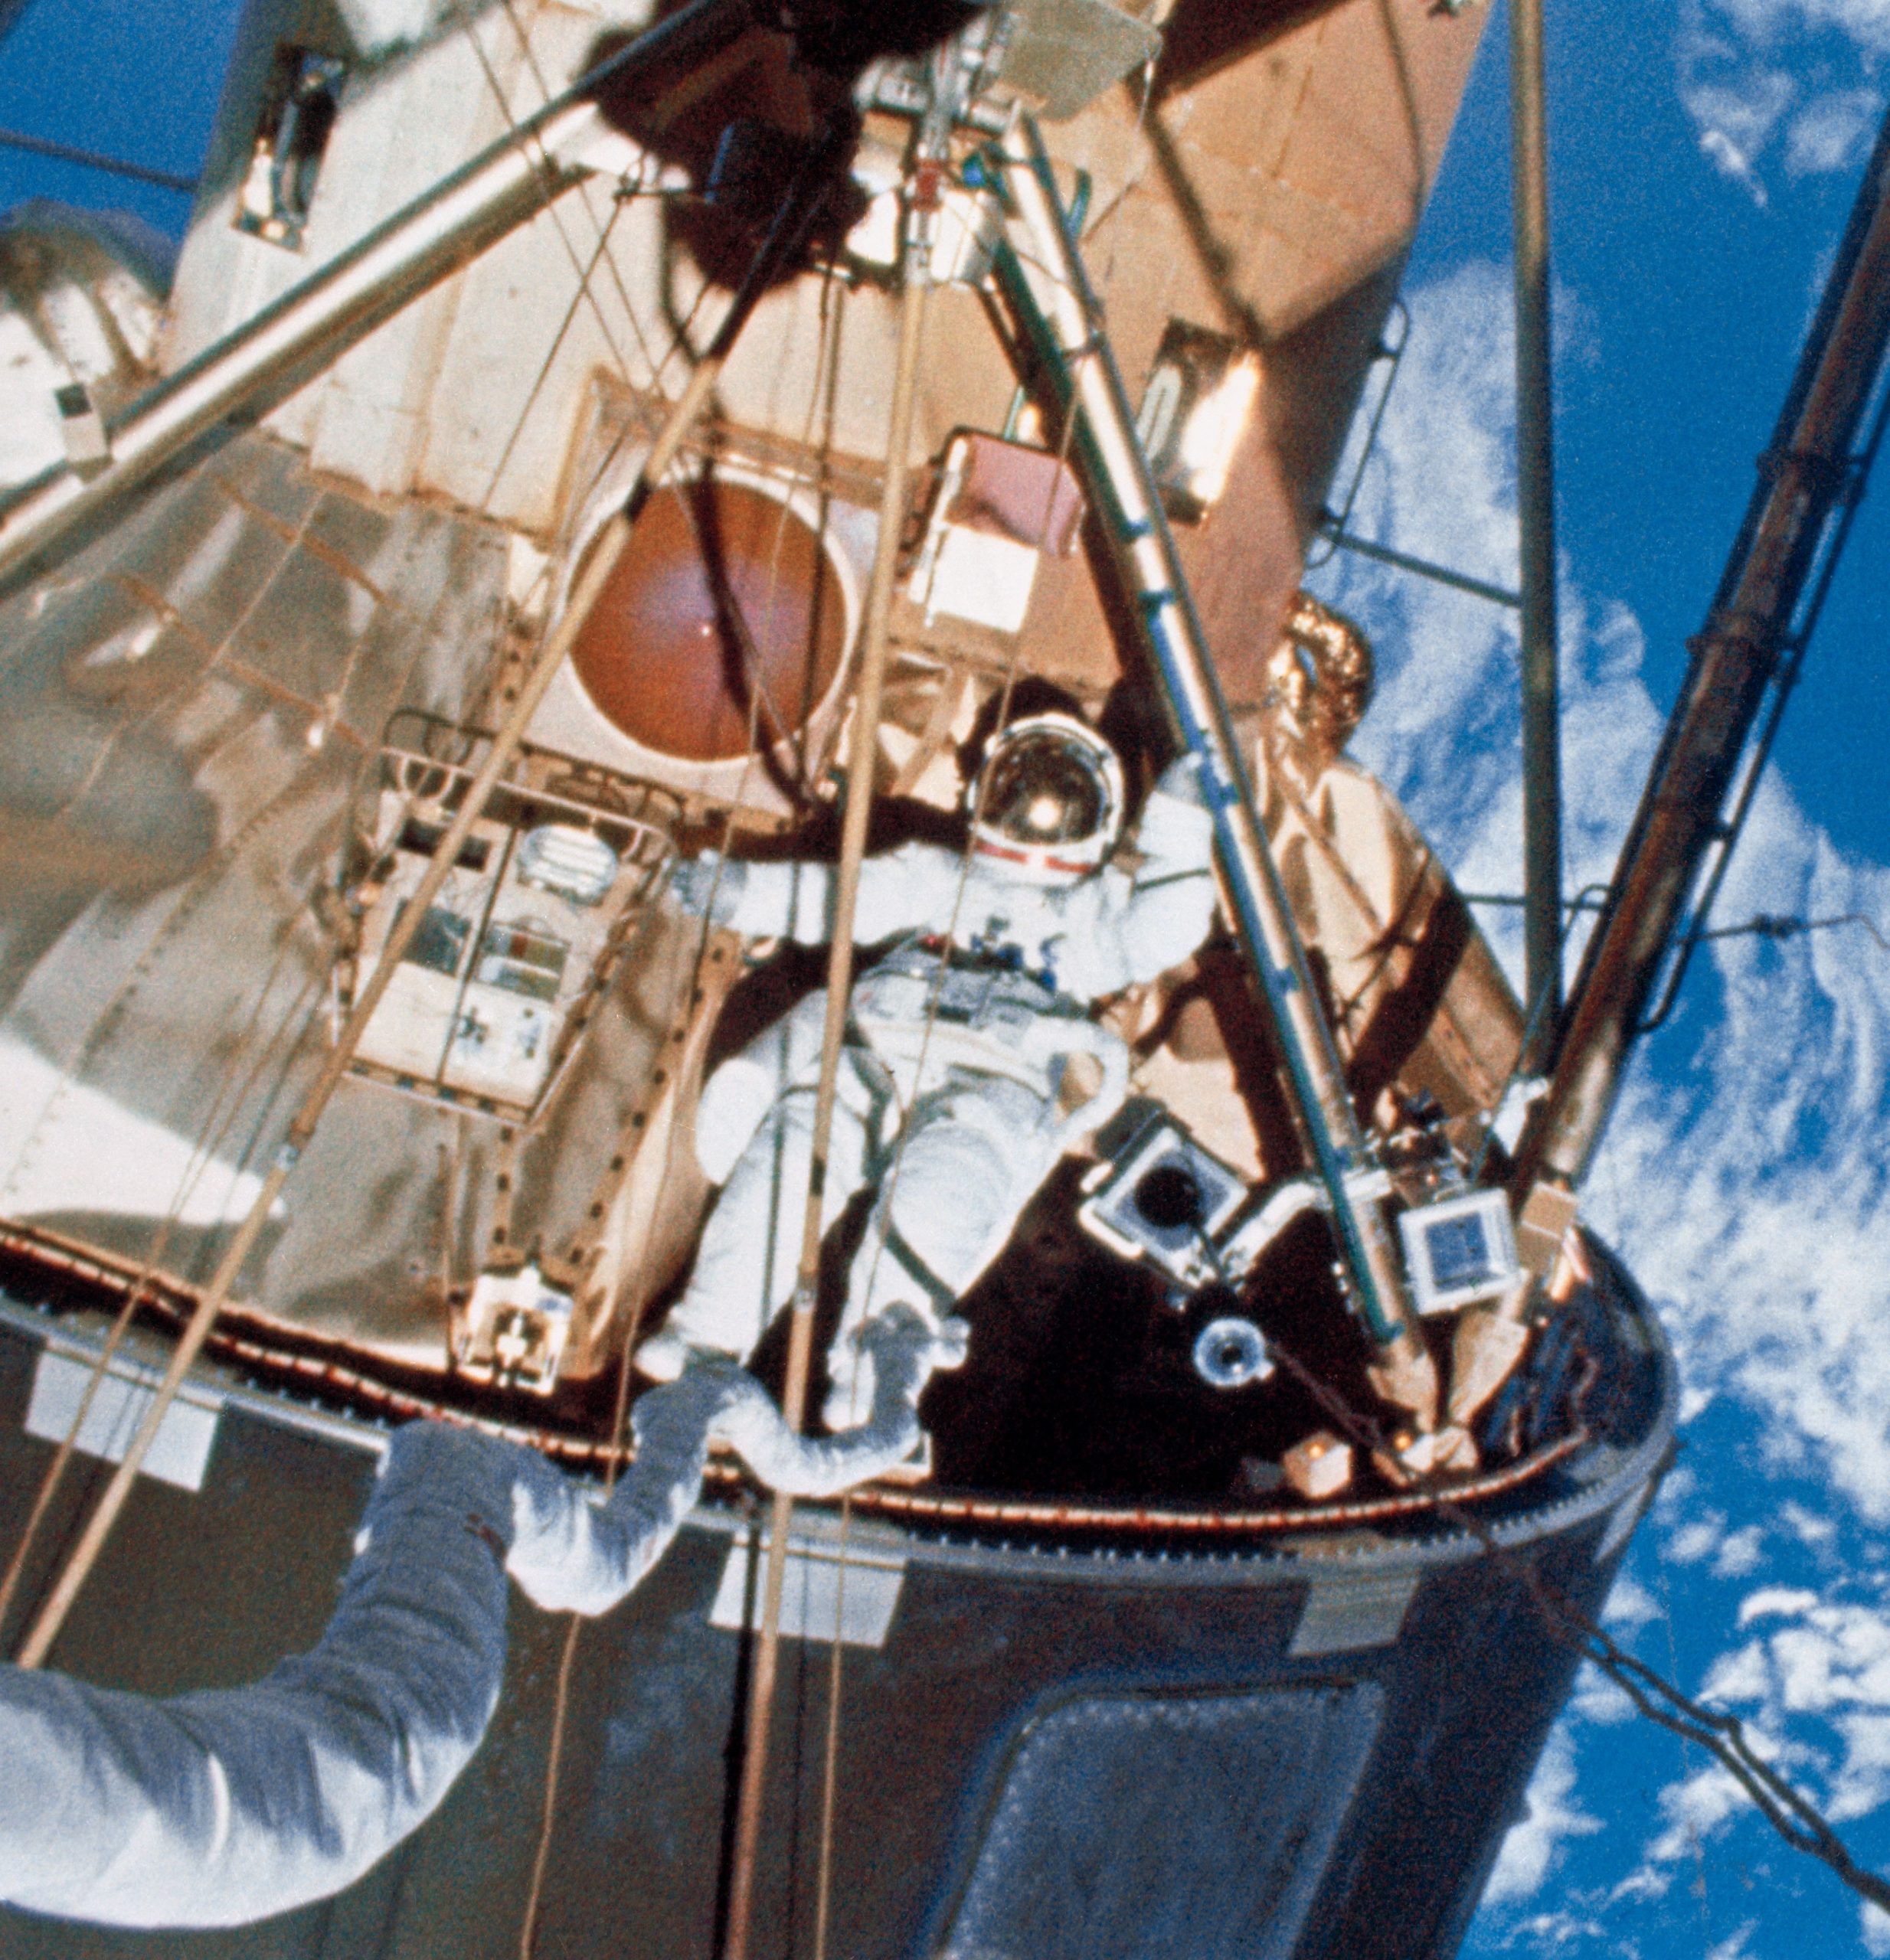 50 Years Ago: Skylab 4 Astronauts Begin Record-Breaking Third Month in Space